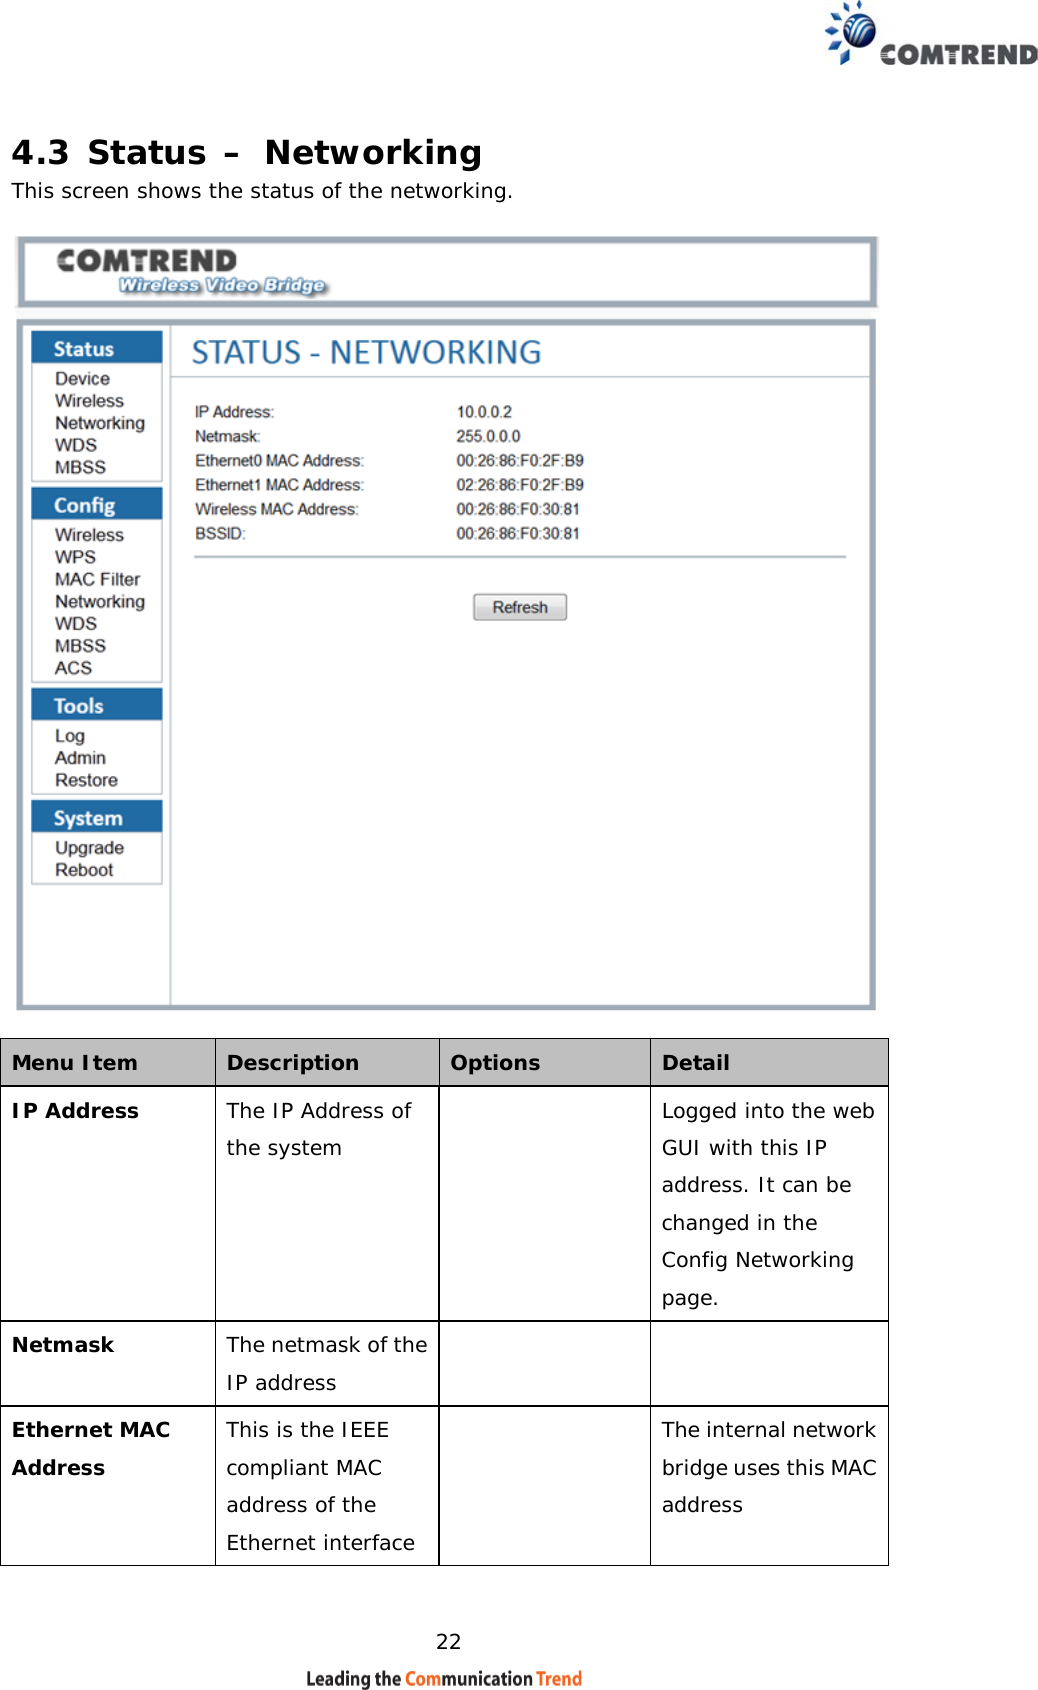    22 4.3 Status – Networking This screen shows the status of the networking.     Menu Item  Description   Options   Detail  IP Address  The IP Address of the system   Logged into the web GUI with this IP address. It can be changed in the Config Networking page.  Netmask  The netmask of the IP address    Ethernet MAC Address   This is the IEEE compliant MAC address of the Ethernet interface   The internal network bridge uses this MAC address 